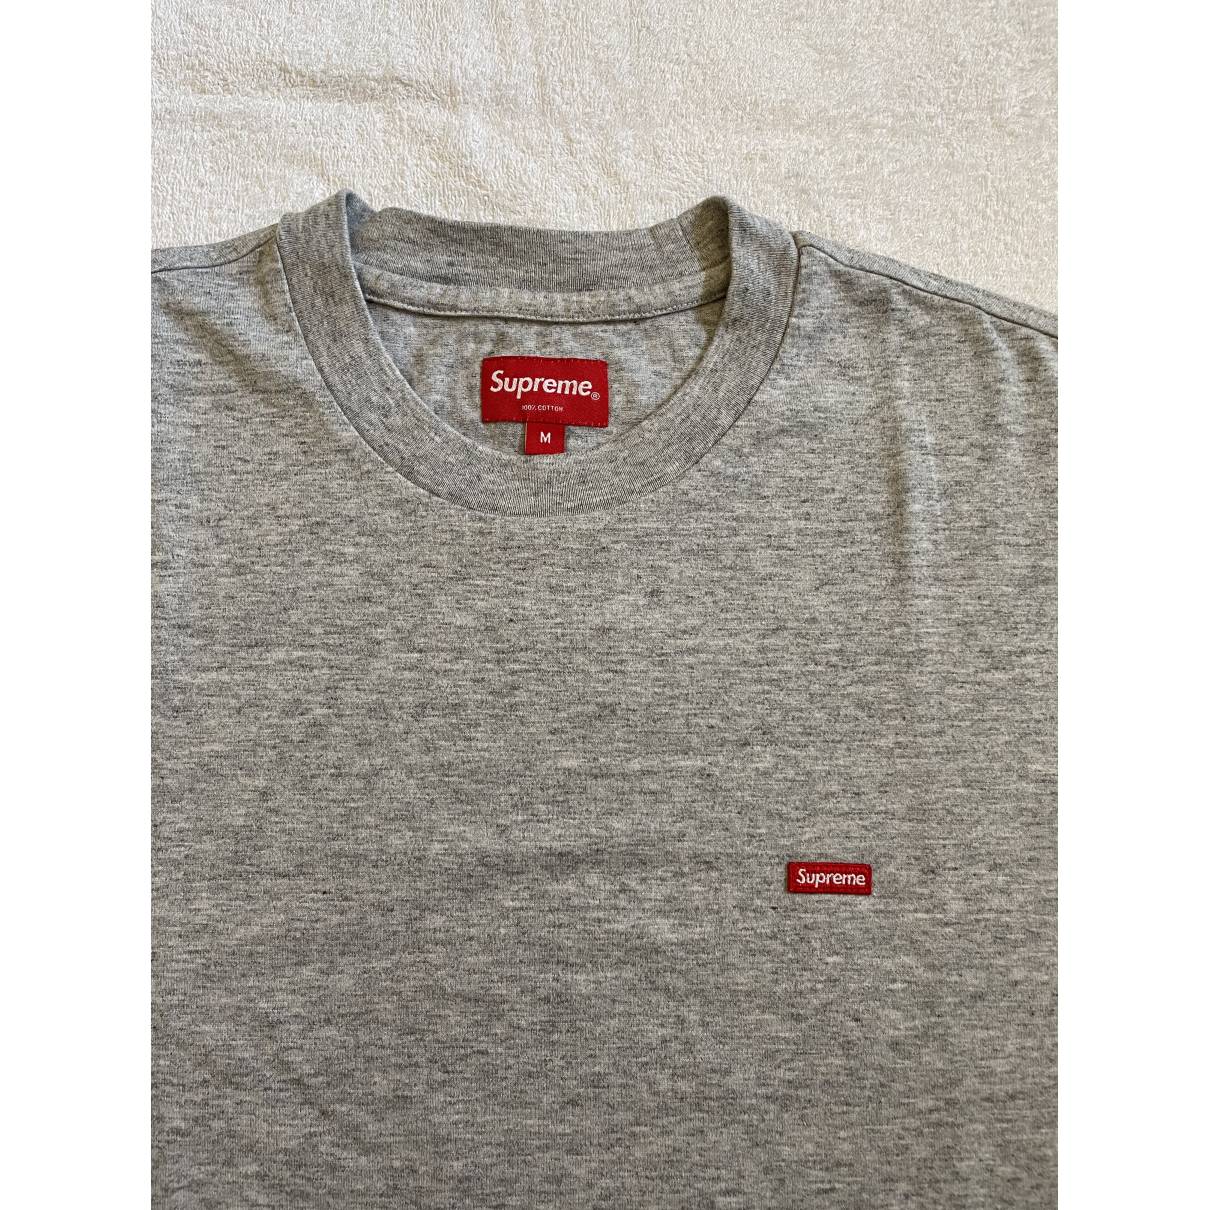 Supreme - Authenticated Box Logo T-Shirt - Cotton Grey Plain For Man, Very Good condition